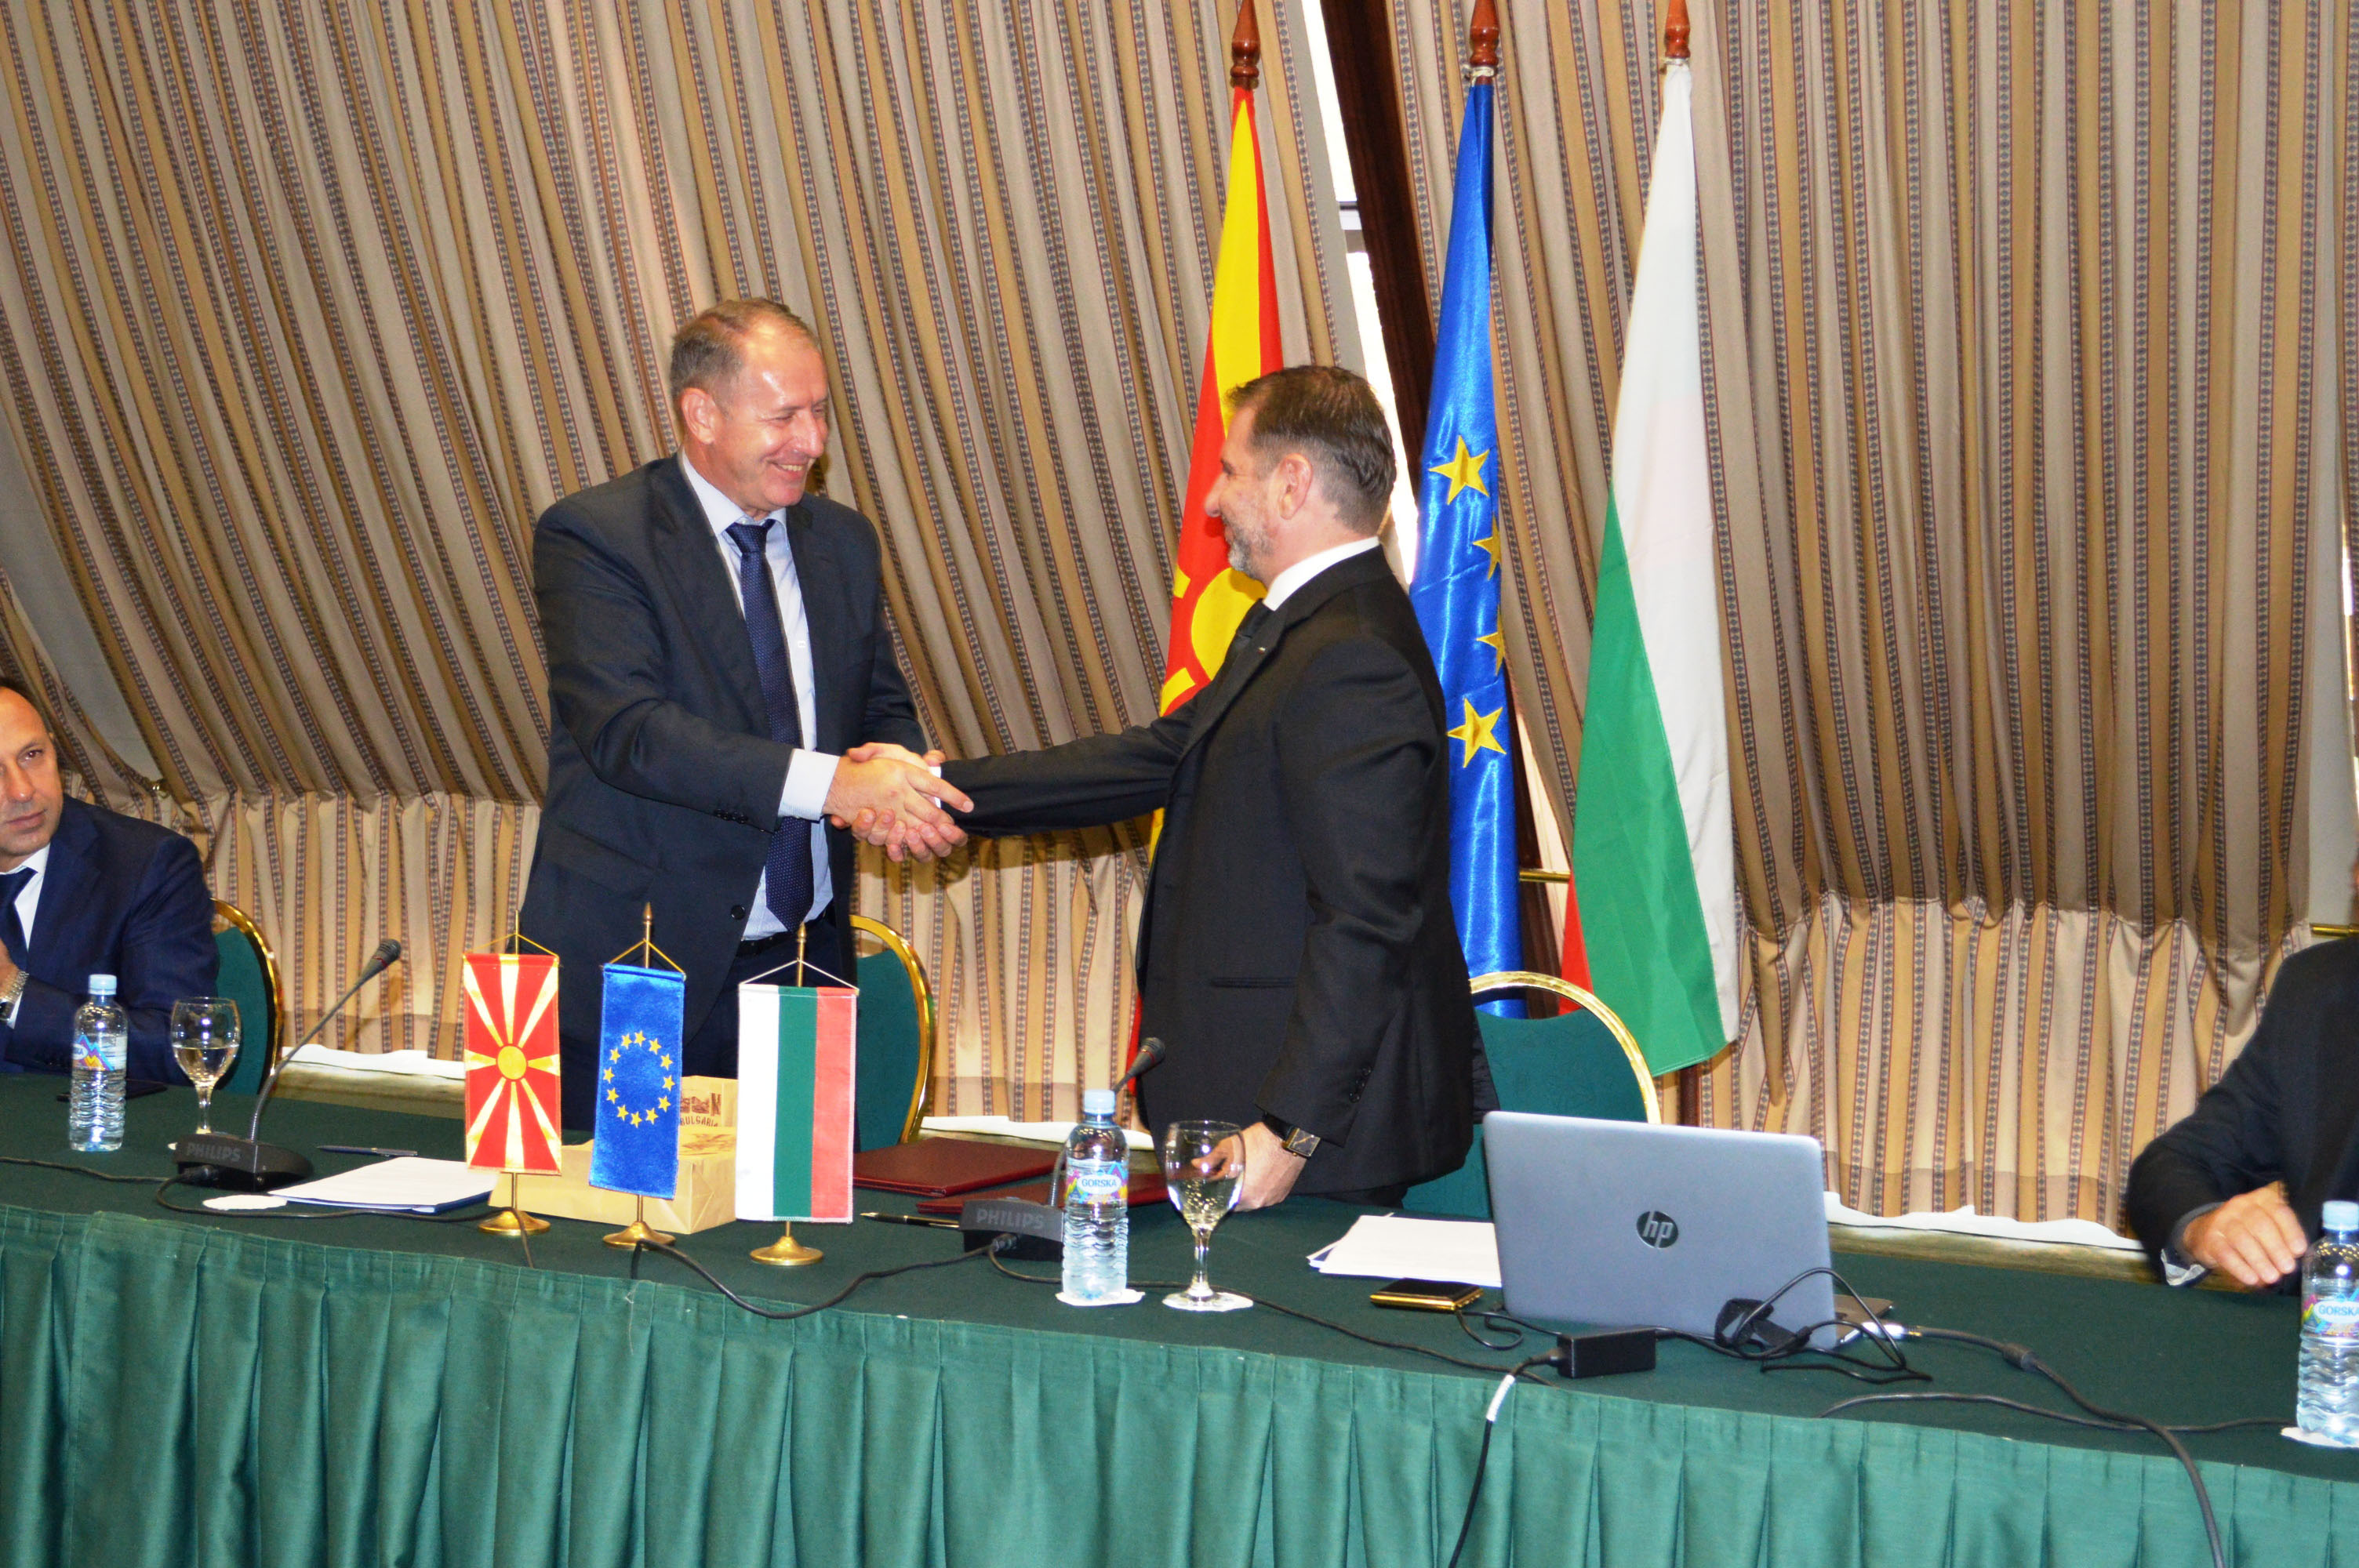 ENERGY REGULATORY COMMISSION OF THE REPUPLIC OF MACEDONIA AND ENERGY AND WATER REGULATORY COMMISSION OF THE REPUBLIC OF BULGARIA SIGNED AN AGREEMENT FOR COOPERATION